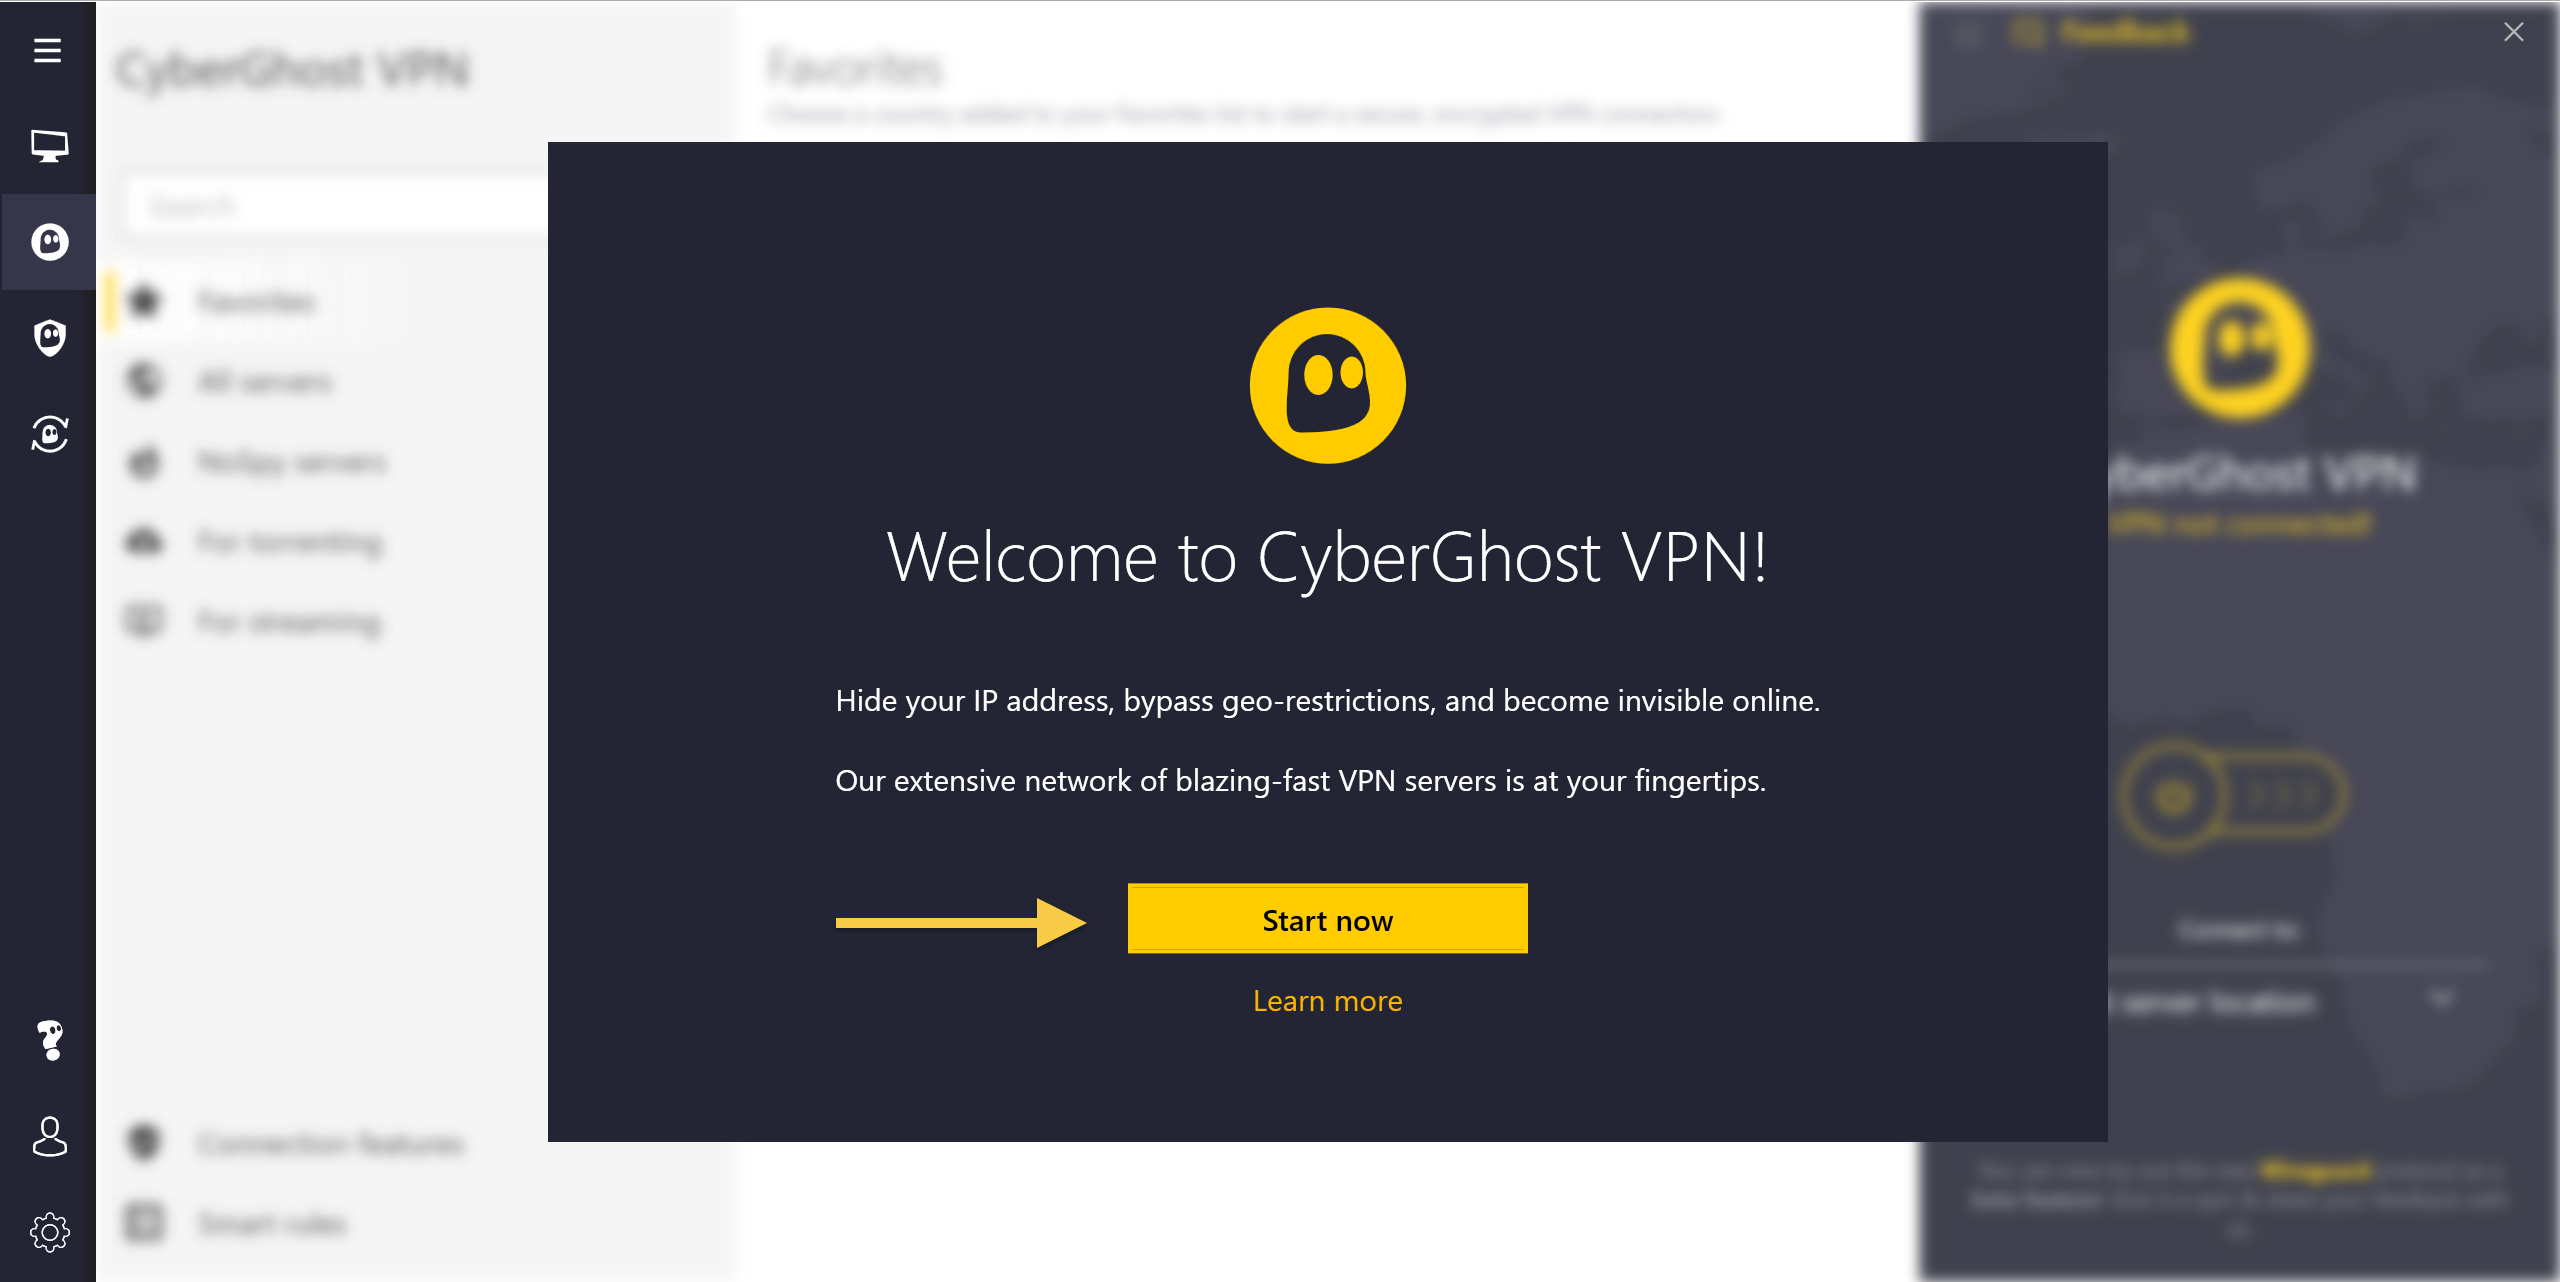 free cyberghost vpn working activation key